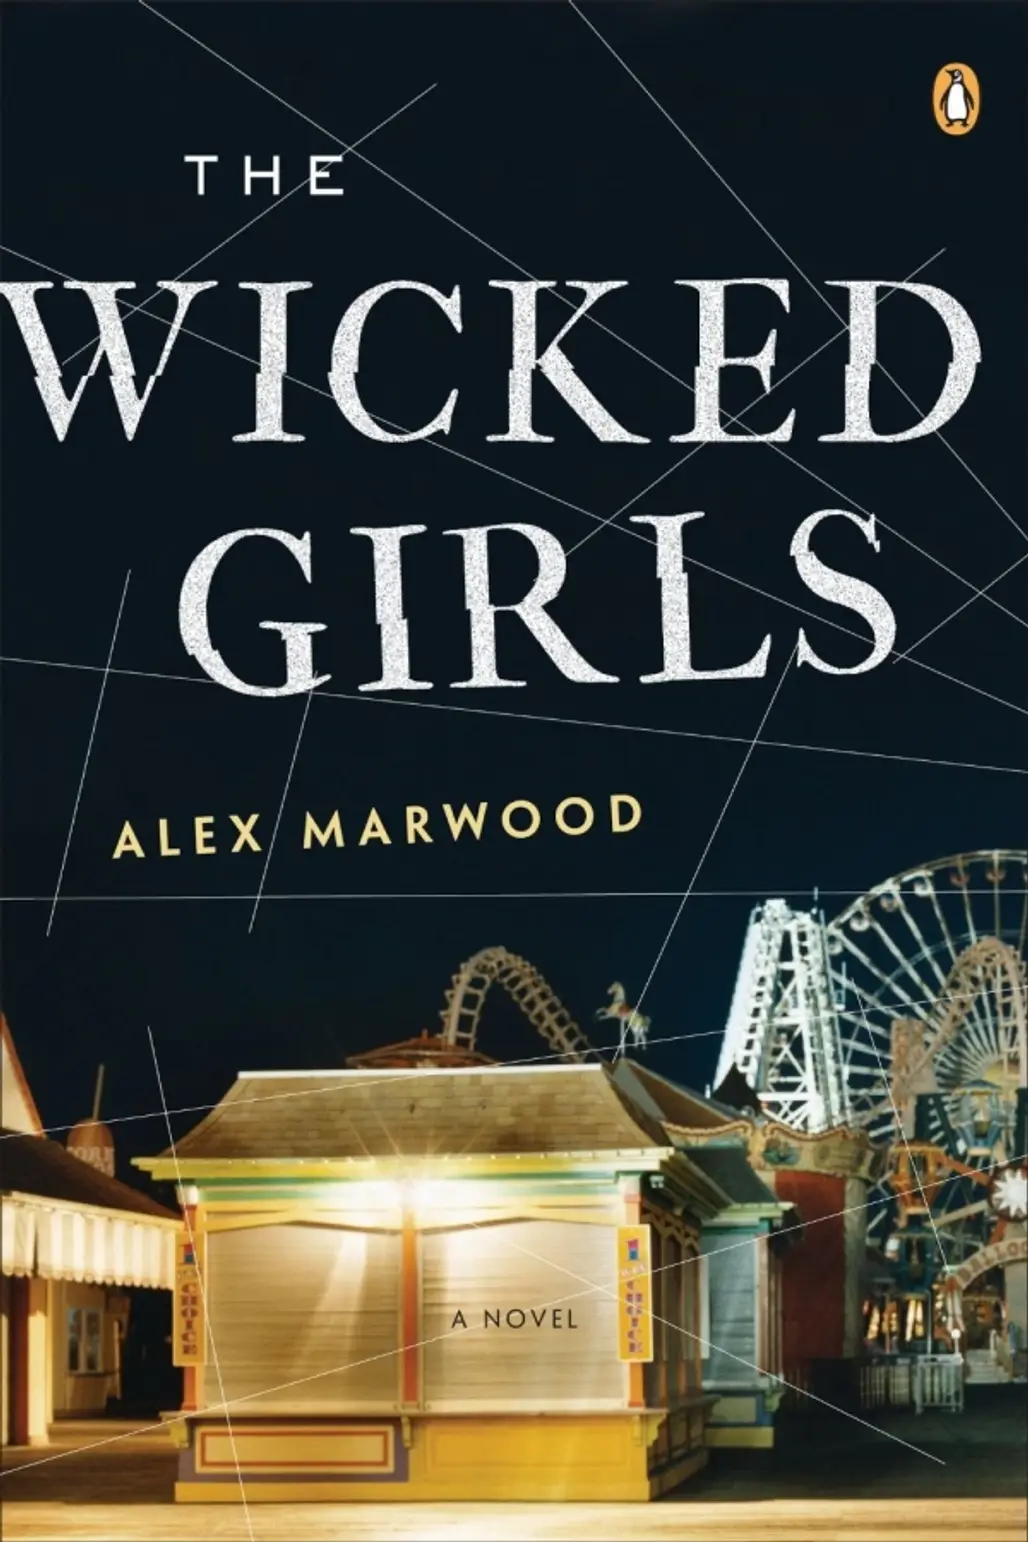 The Wicked Girls…